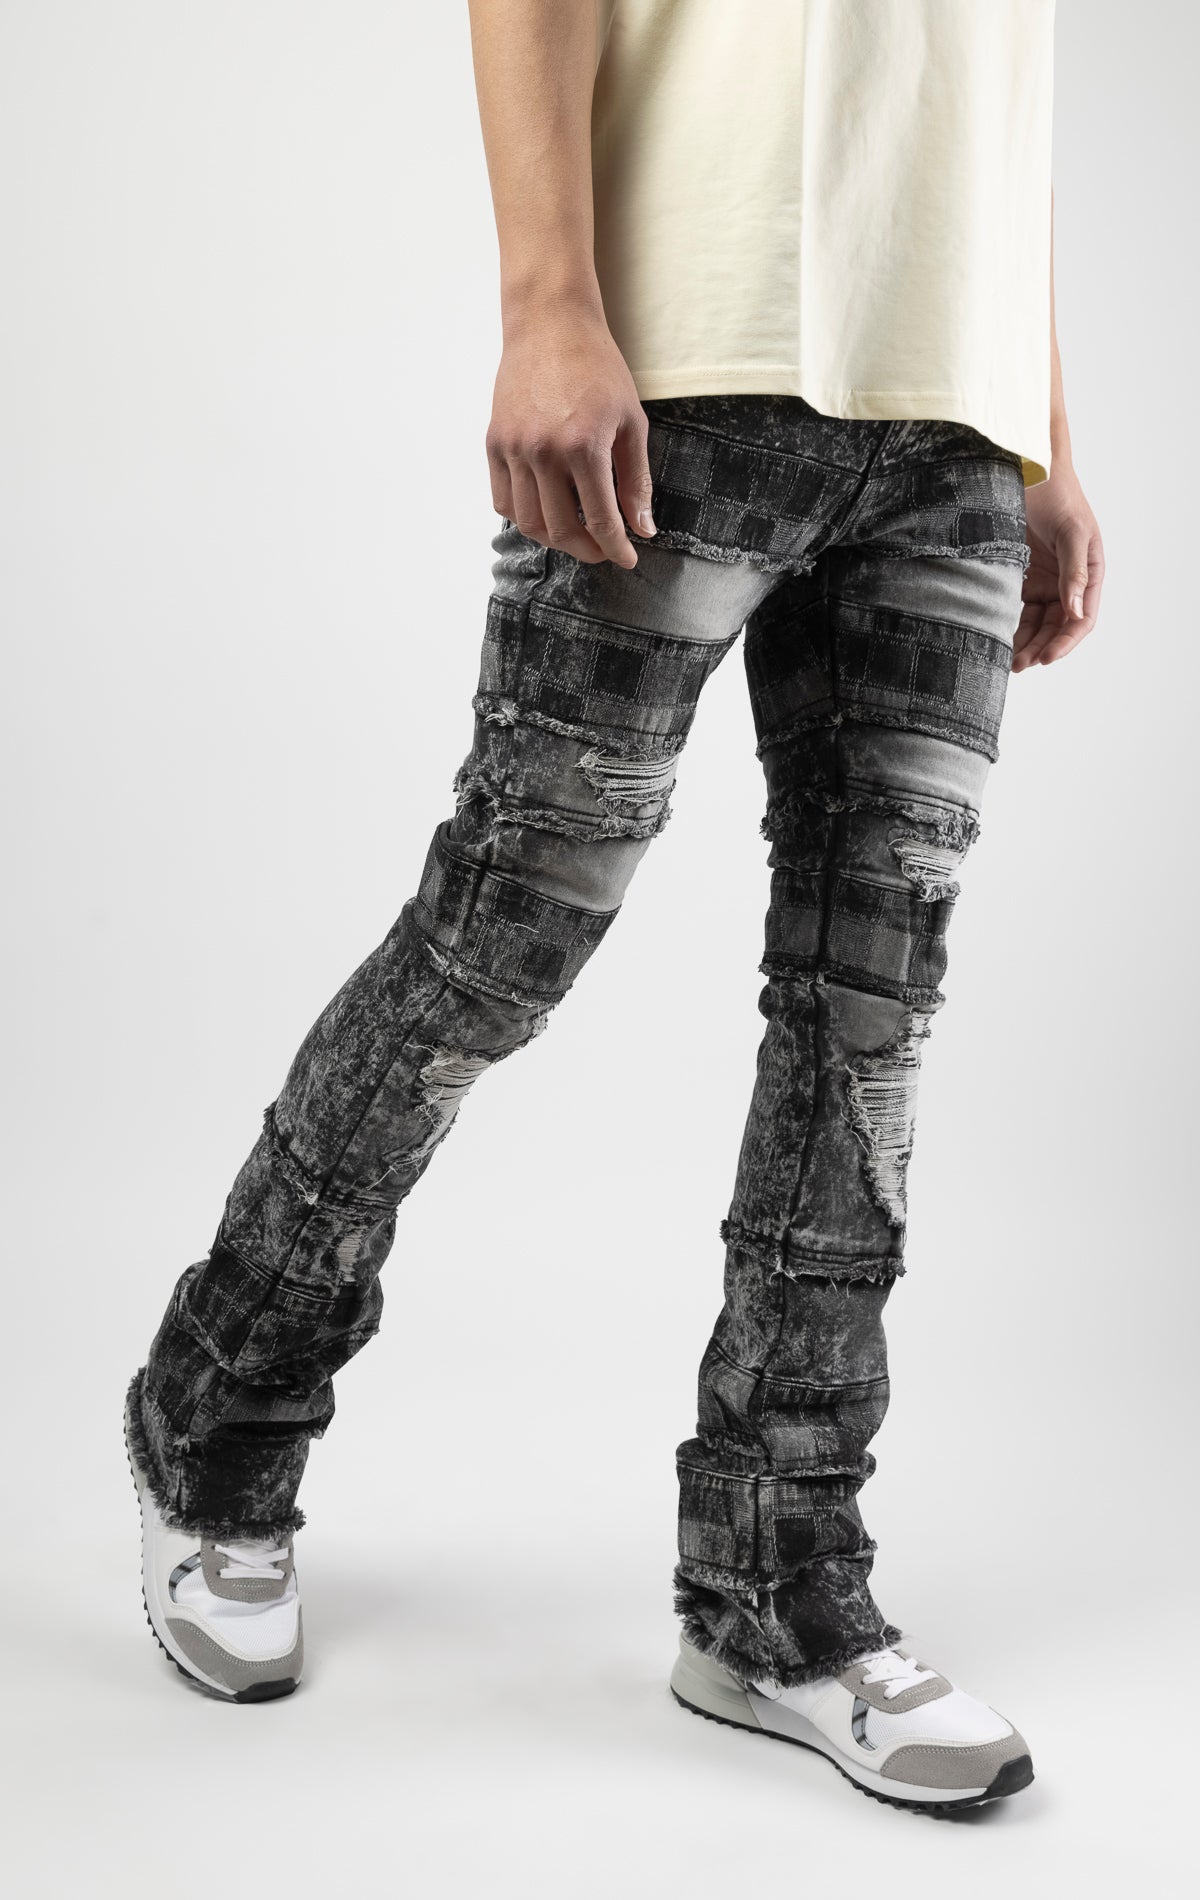 Black wash iconic stacked jeans crafted from high-quality, durable denim fabric consisting of 98% cotton and 2% spandex with a semi flare silhouette and a length of 35"-37". Featuring a distinctive ripped and repair design with pocket patches and a multi-tone dye throughout, these urban-inspired pants are true to size